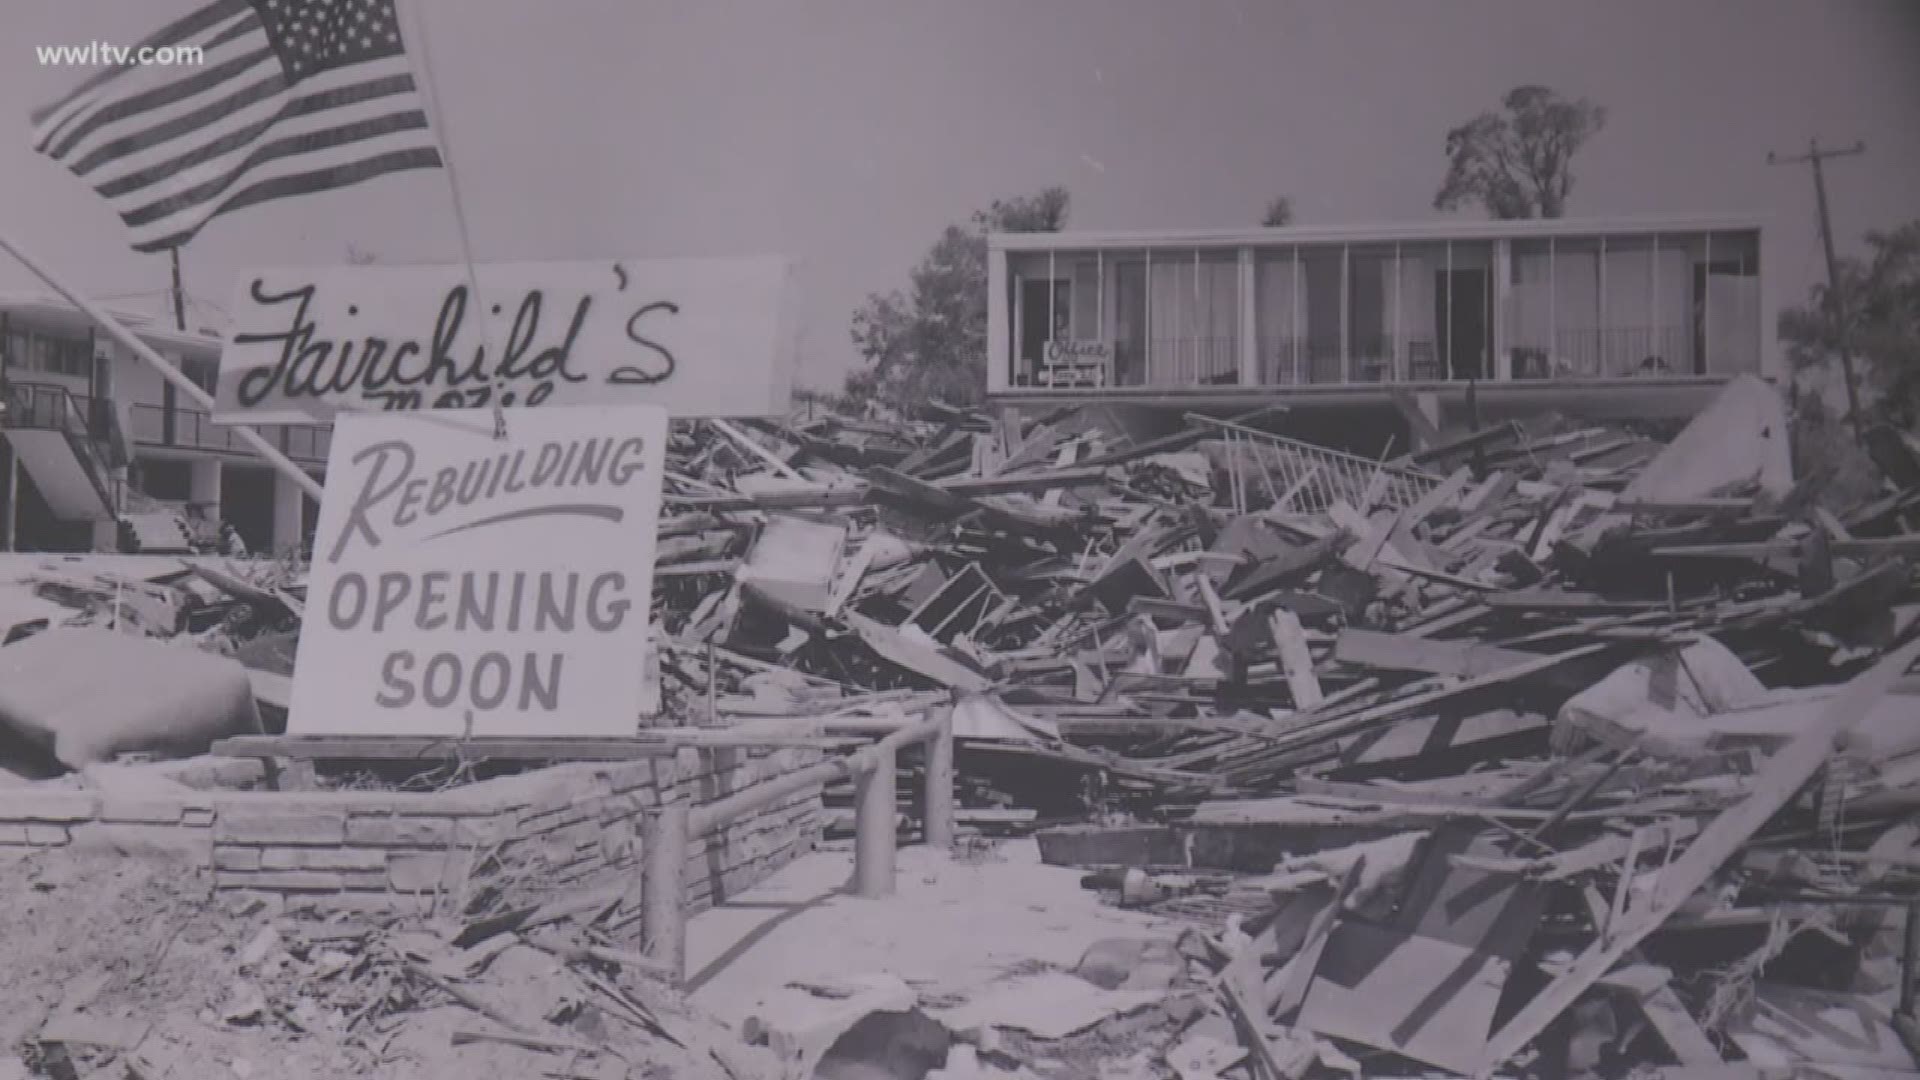 The new anniversary exhibit chronicles how the monster storm changed the Mississippi Gulf Coast in ways not seen until a similar storm, Katrina, 36 years later.